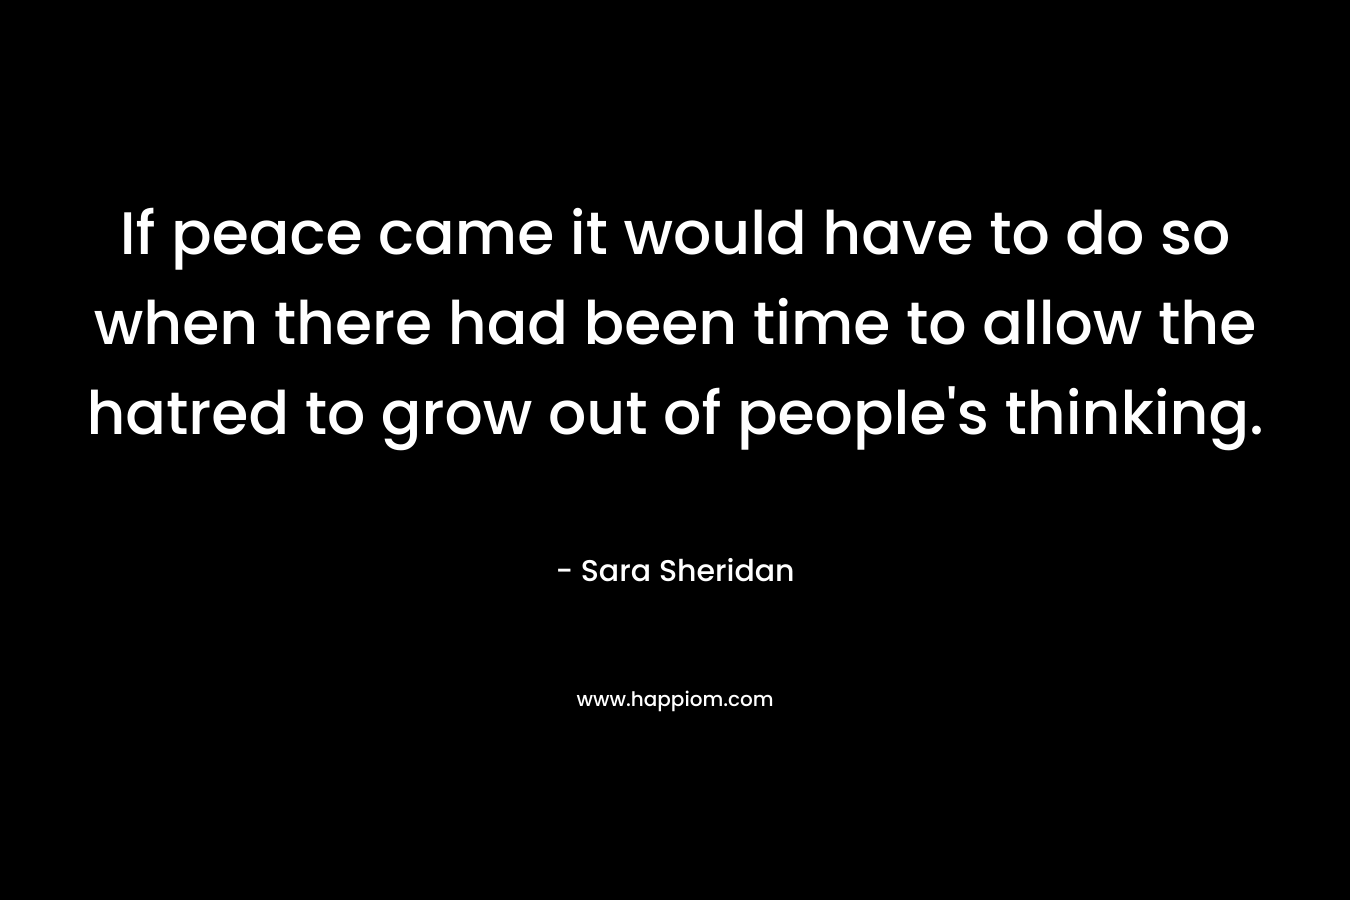 If peace came it would have to do so when there had been time to allow the hatred to grow out of people’s thinking. – Sara Sheridan